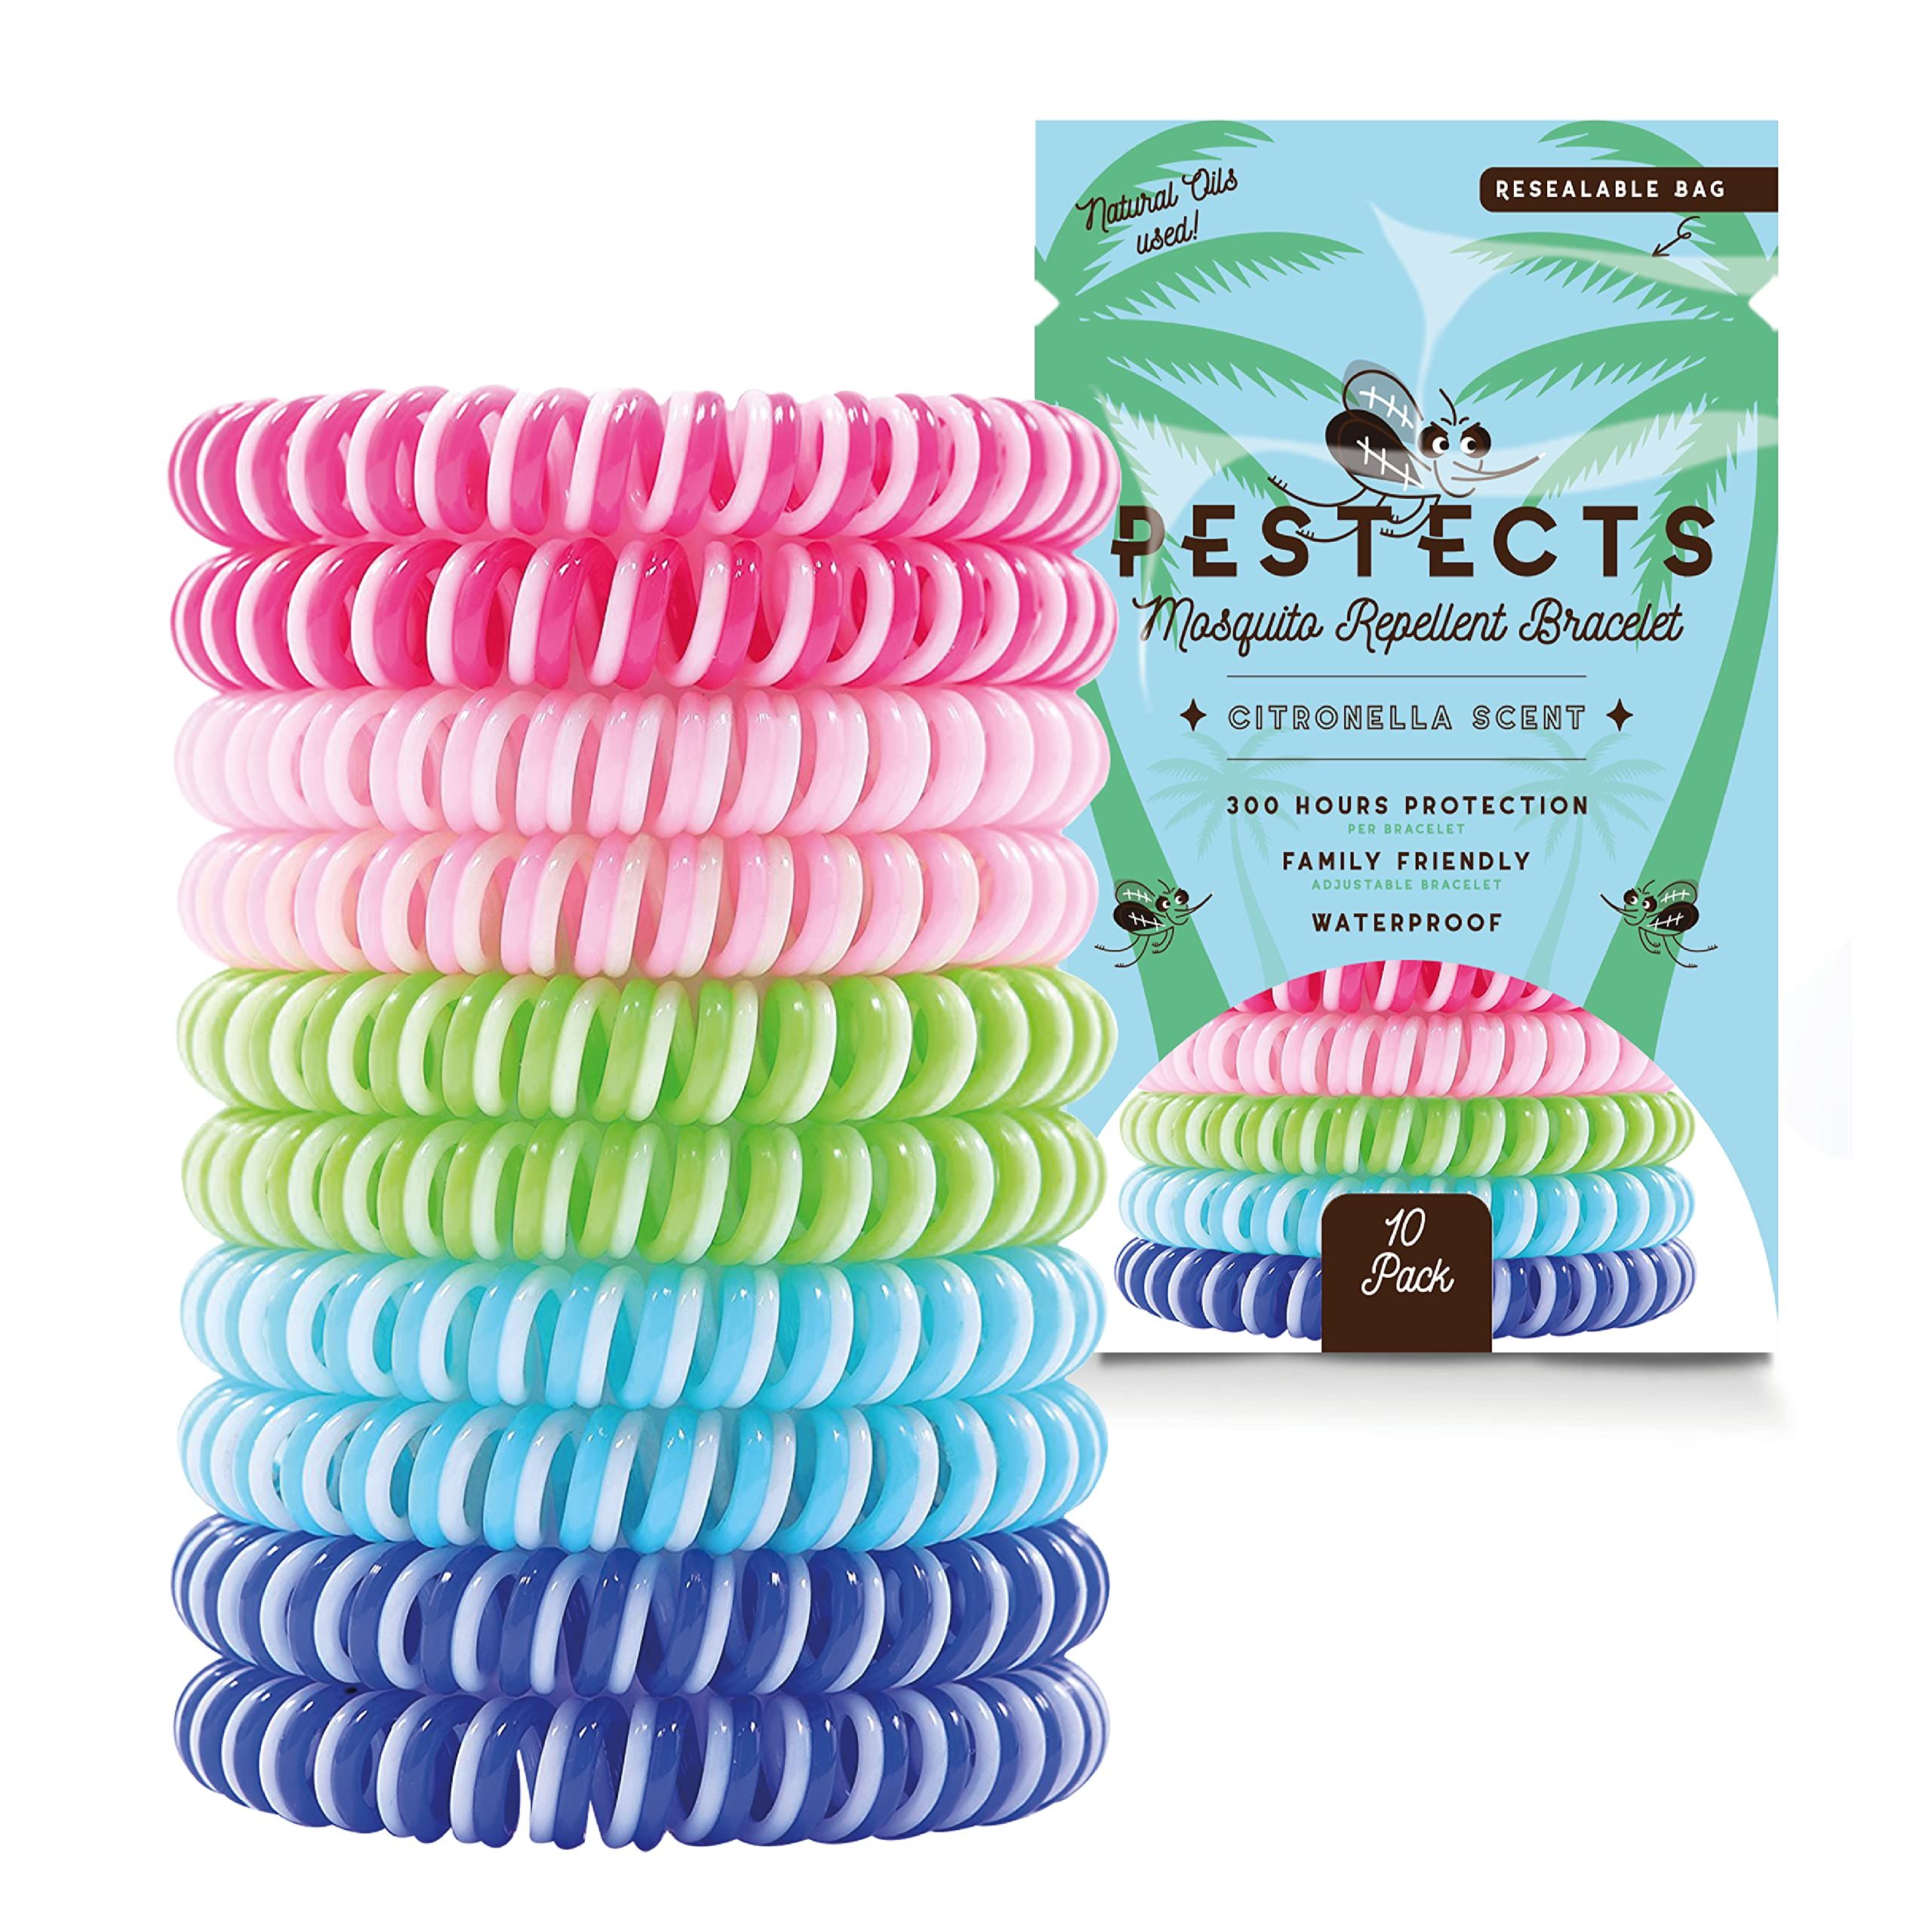 Pestects Mosquito Repellent Bracelet 10 Pack, Deet-Free Natural Anti Bug Wristbands for Adults & Kids, Lasts Up to 300 Hours, Waterproof (Mosquito Repellent Band) | Amazon (UK)